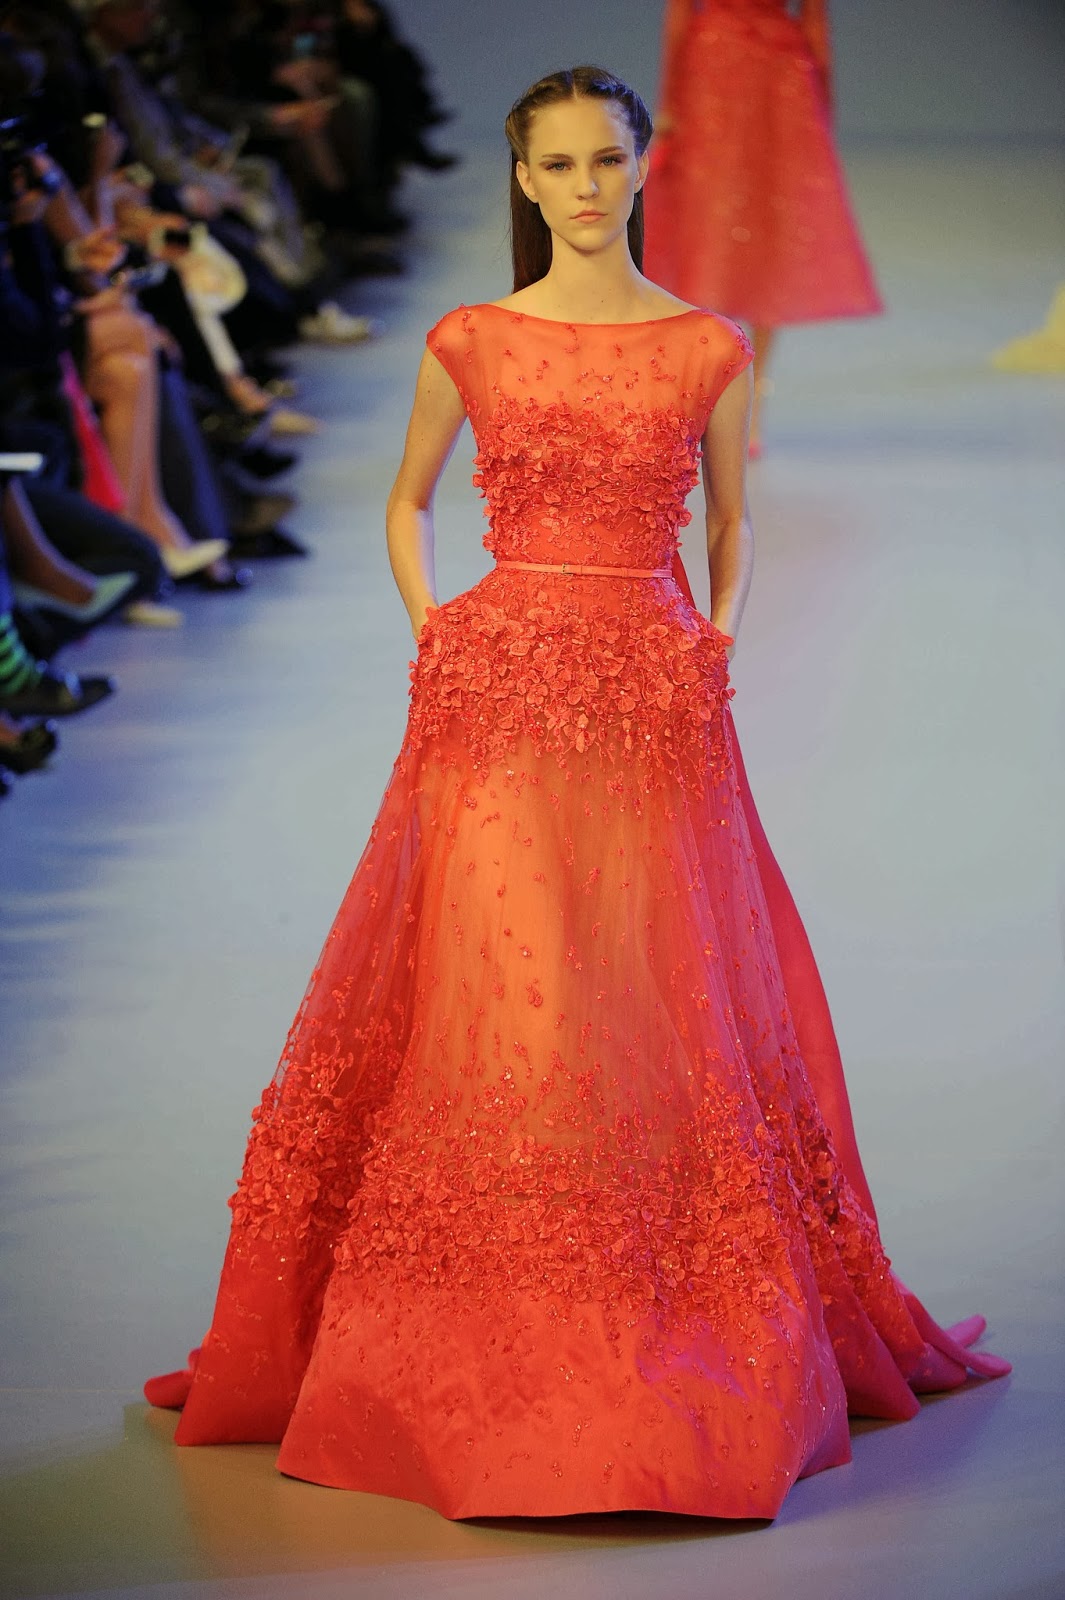 AMORE (Beauty + Fashion): WEDDING BELL WEDNESDAY - ELIE SAAB SS14 COUTURE